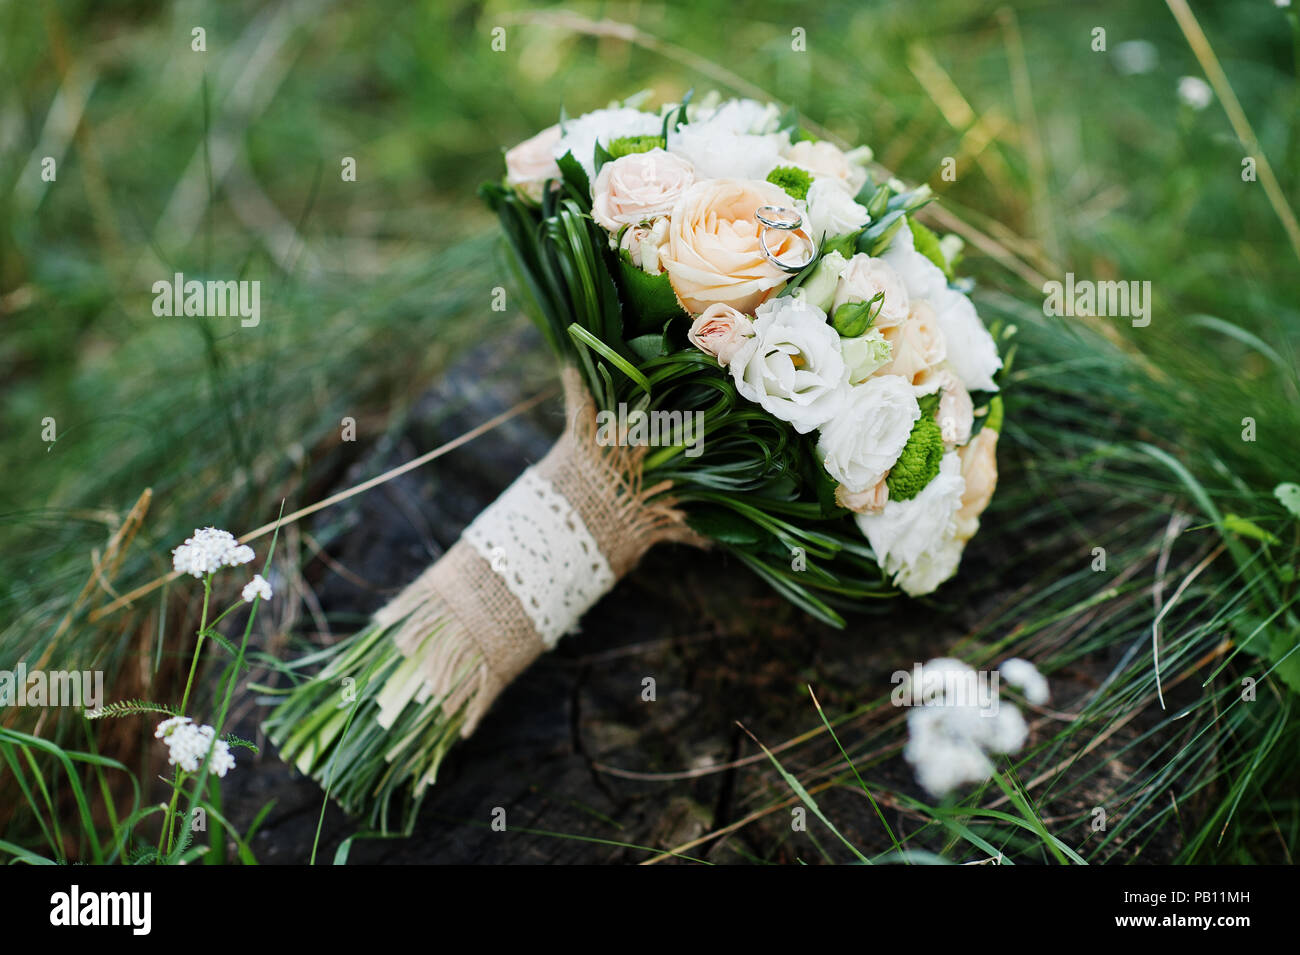 Close-up photo of wedding bouquet made of roses on the stump. Stock Photo